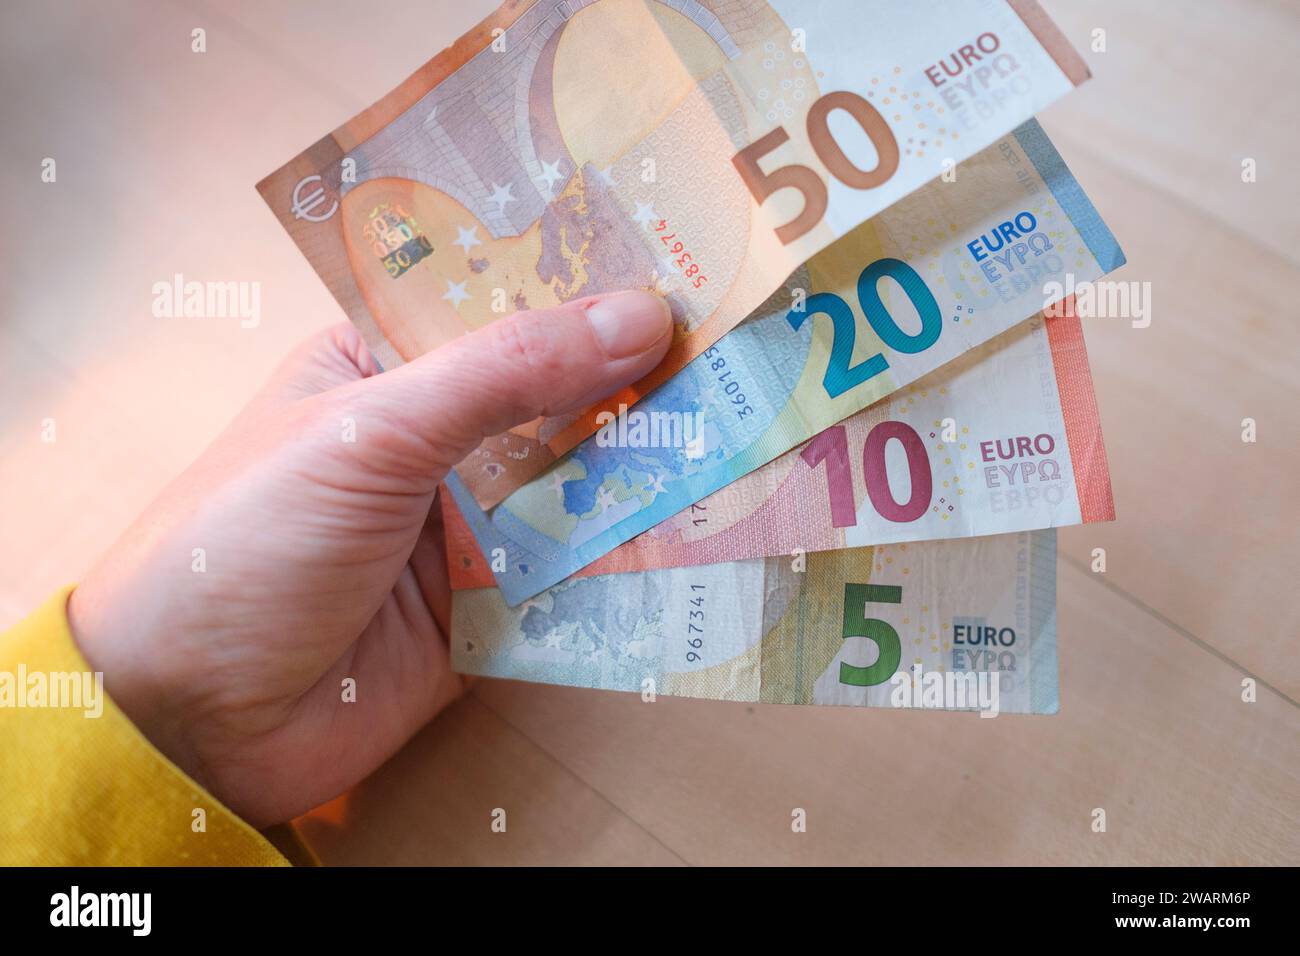 Woman's hand holding various euro banknotes Stock Photo